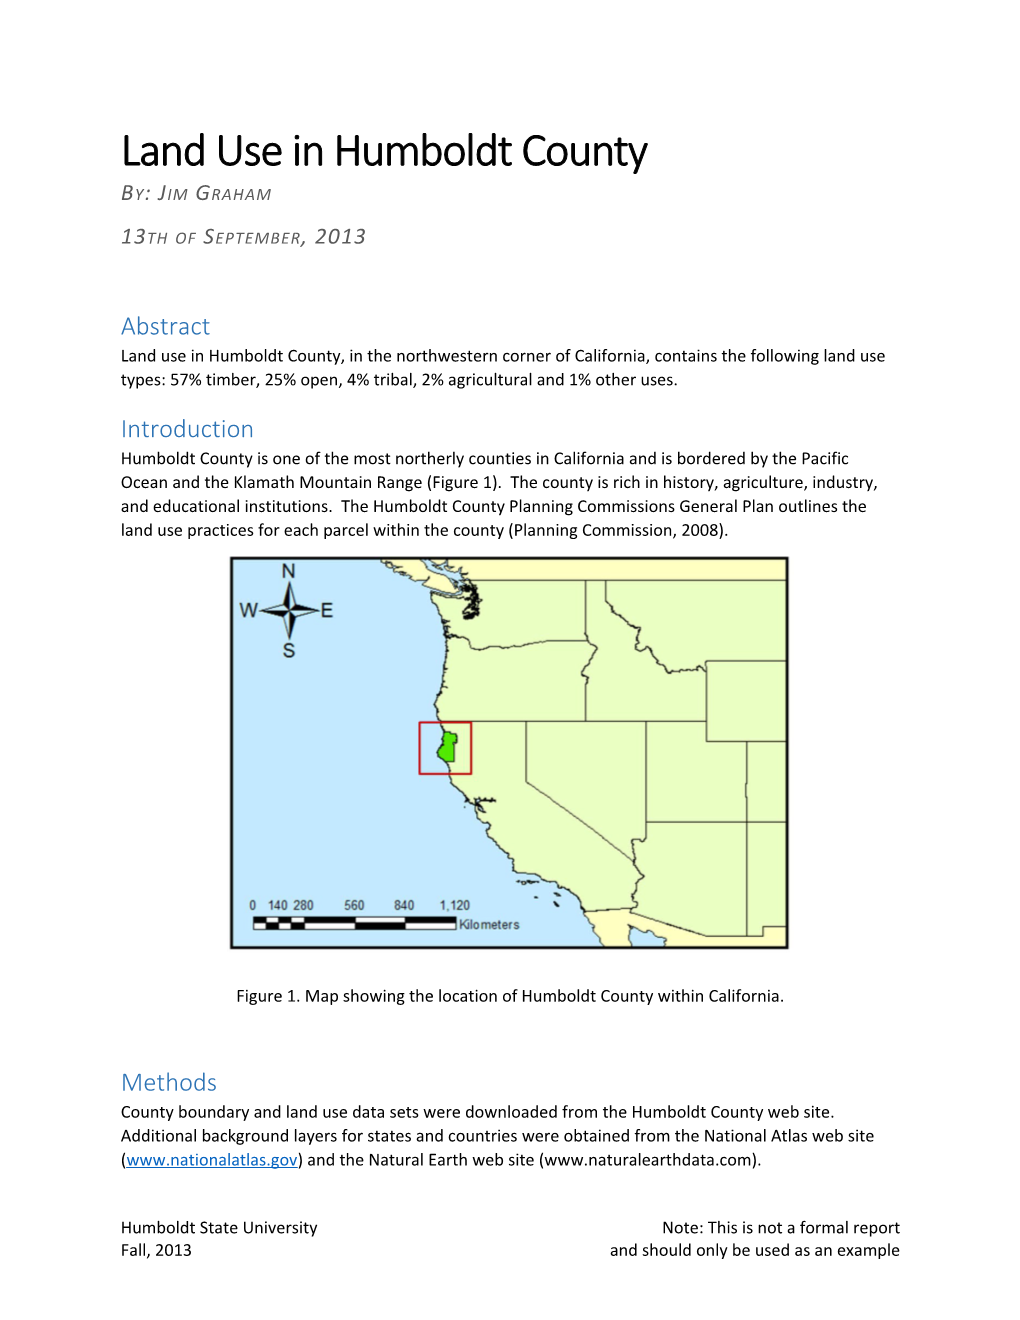 Land Use in Humboldt County JG1